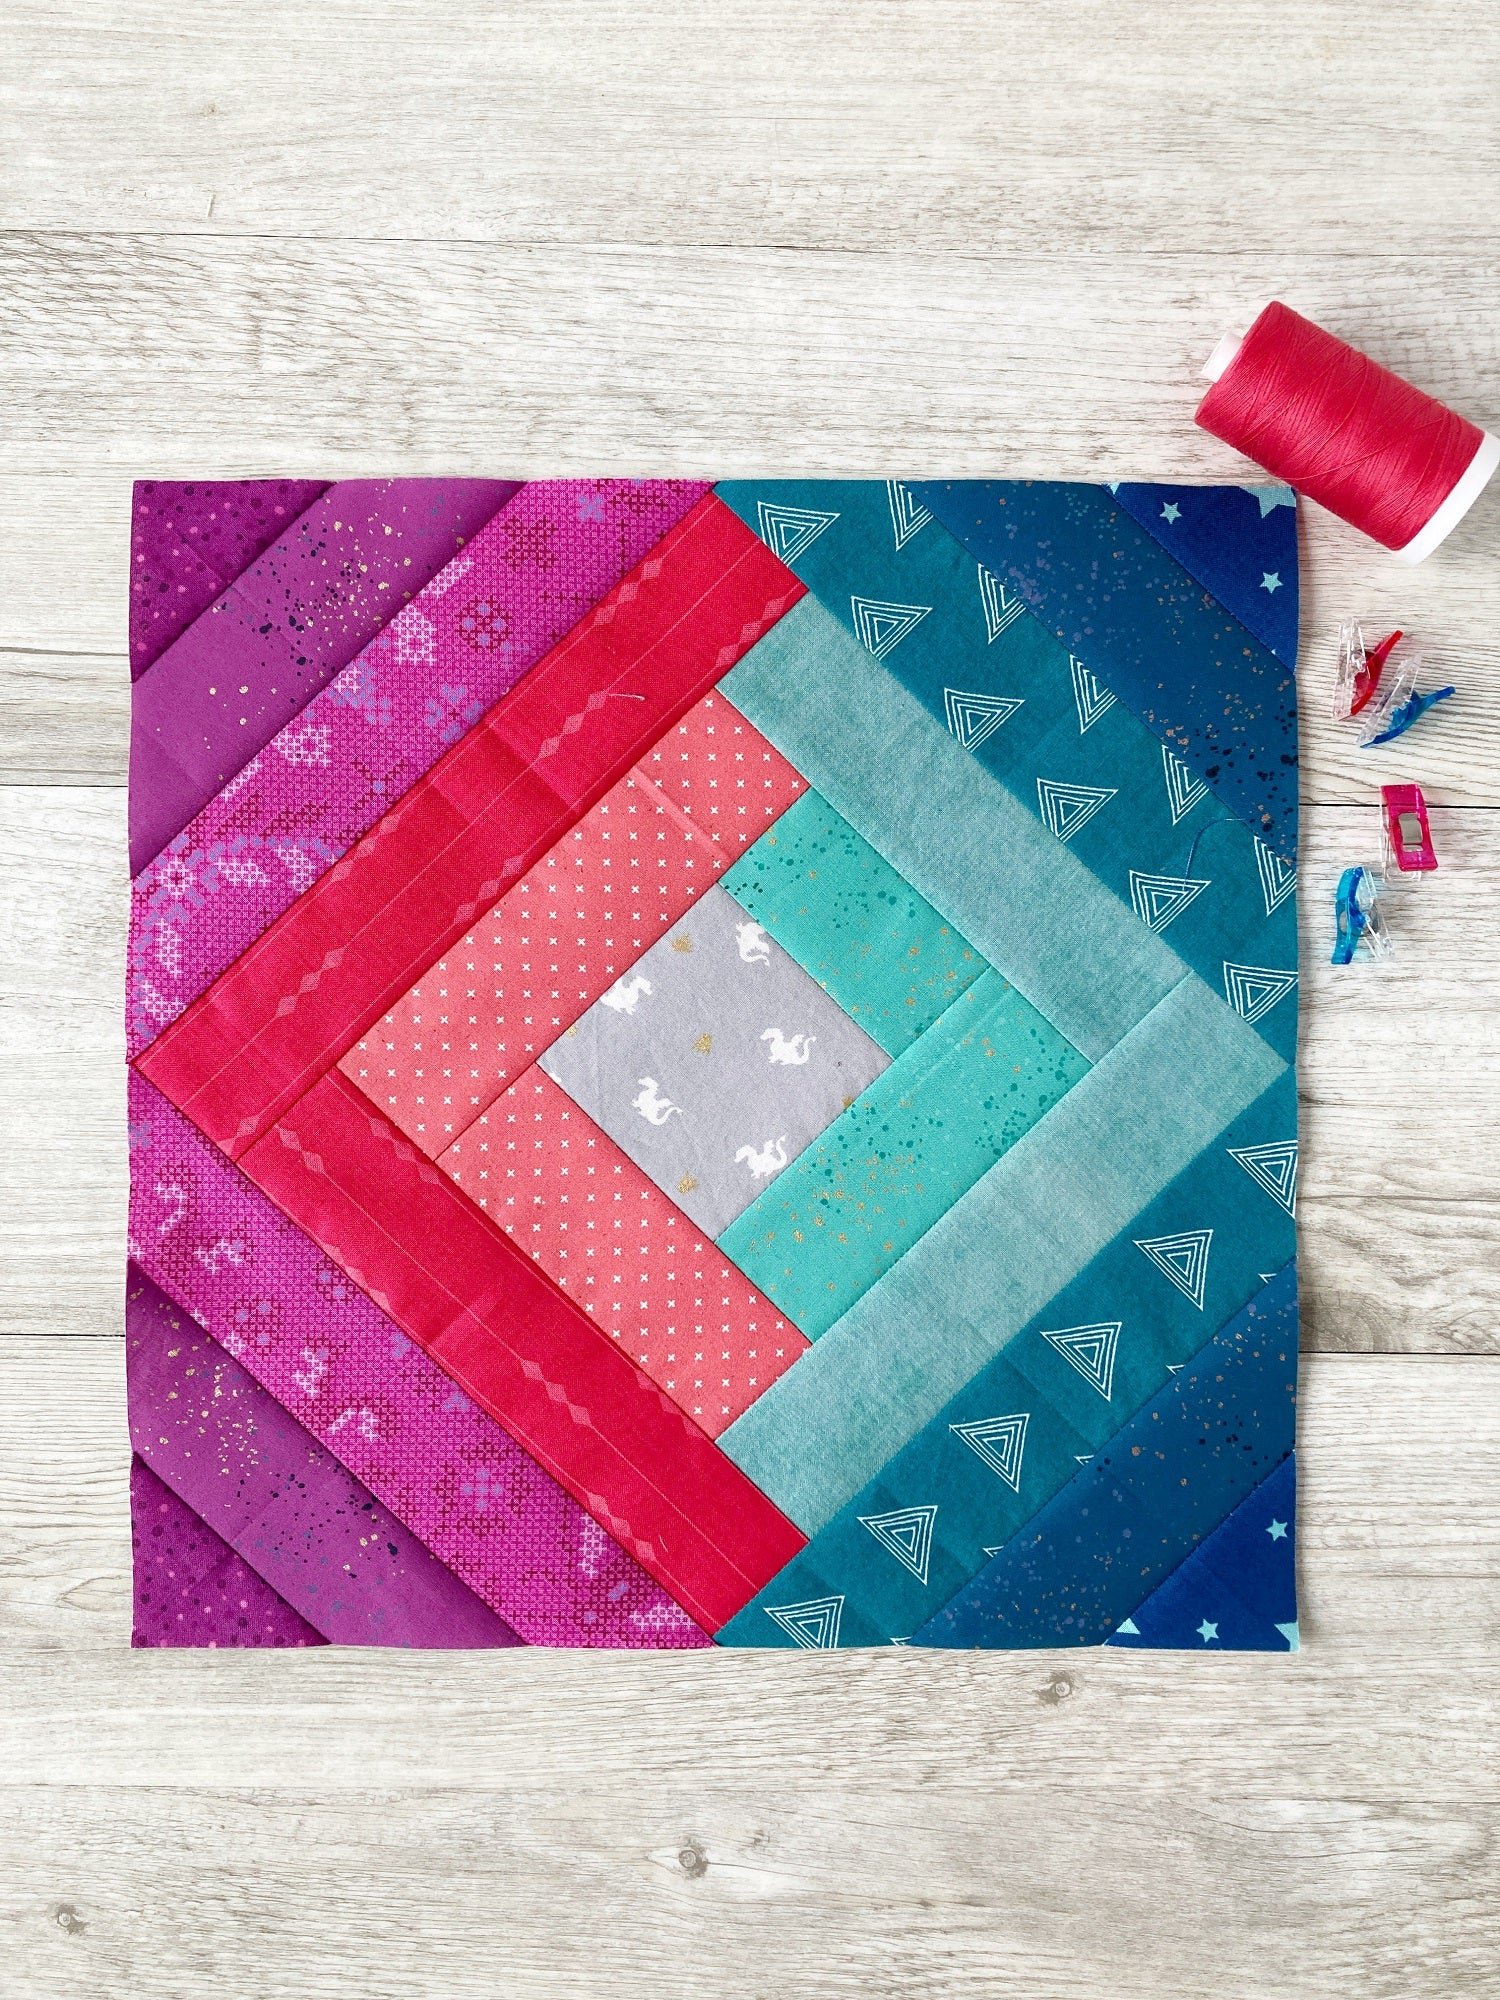 The Twisted Log Cabin is a best-selling quilt block pattern by Penny Spool Quilts